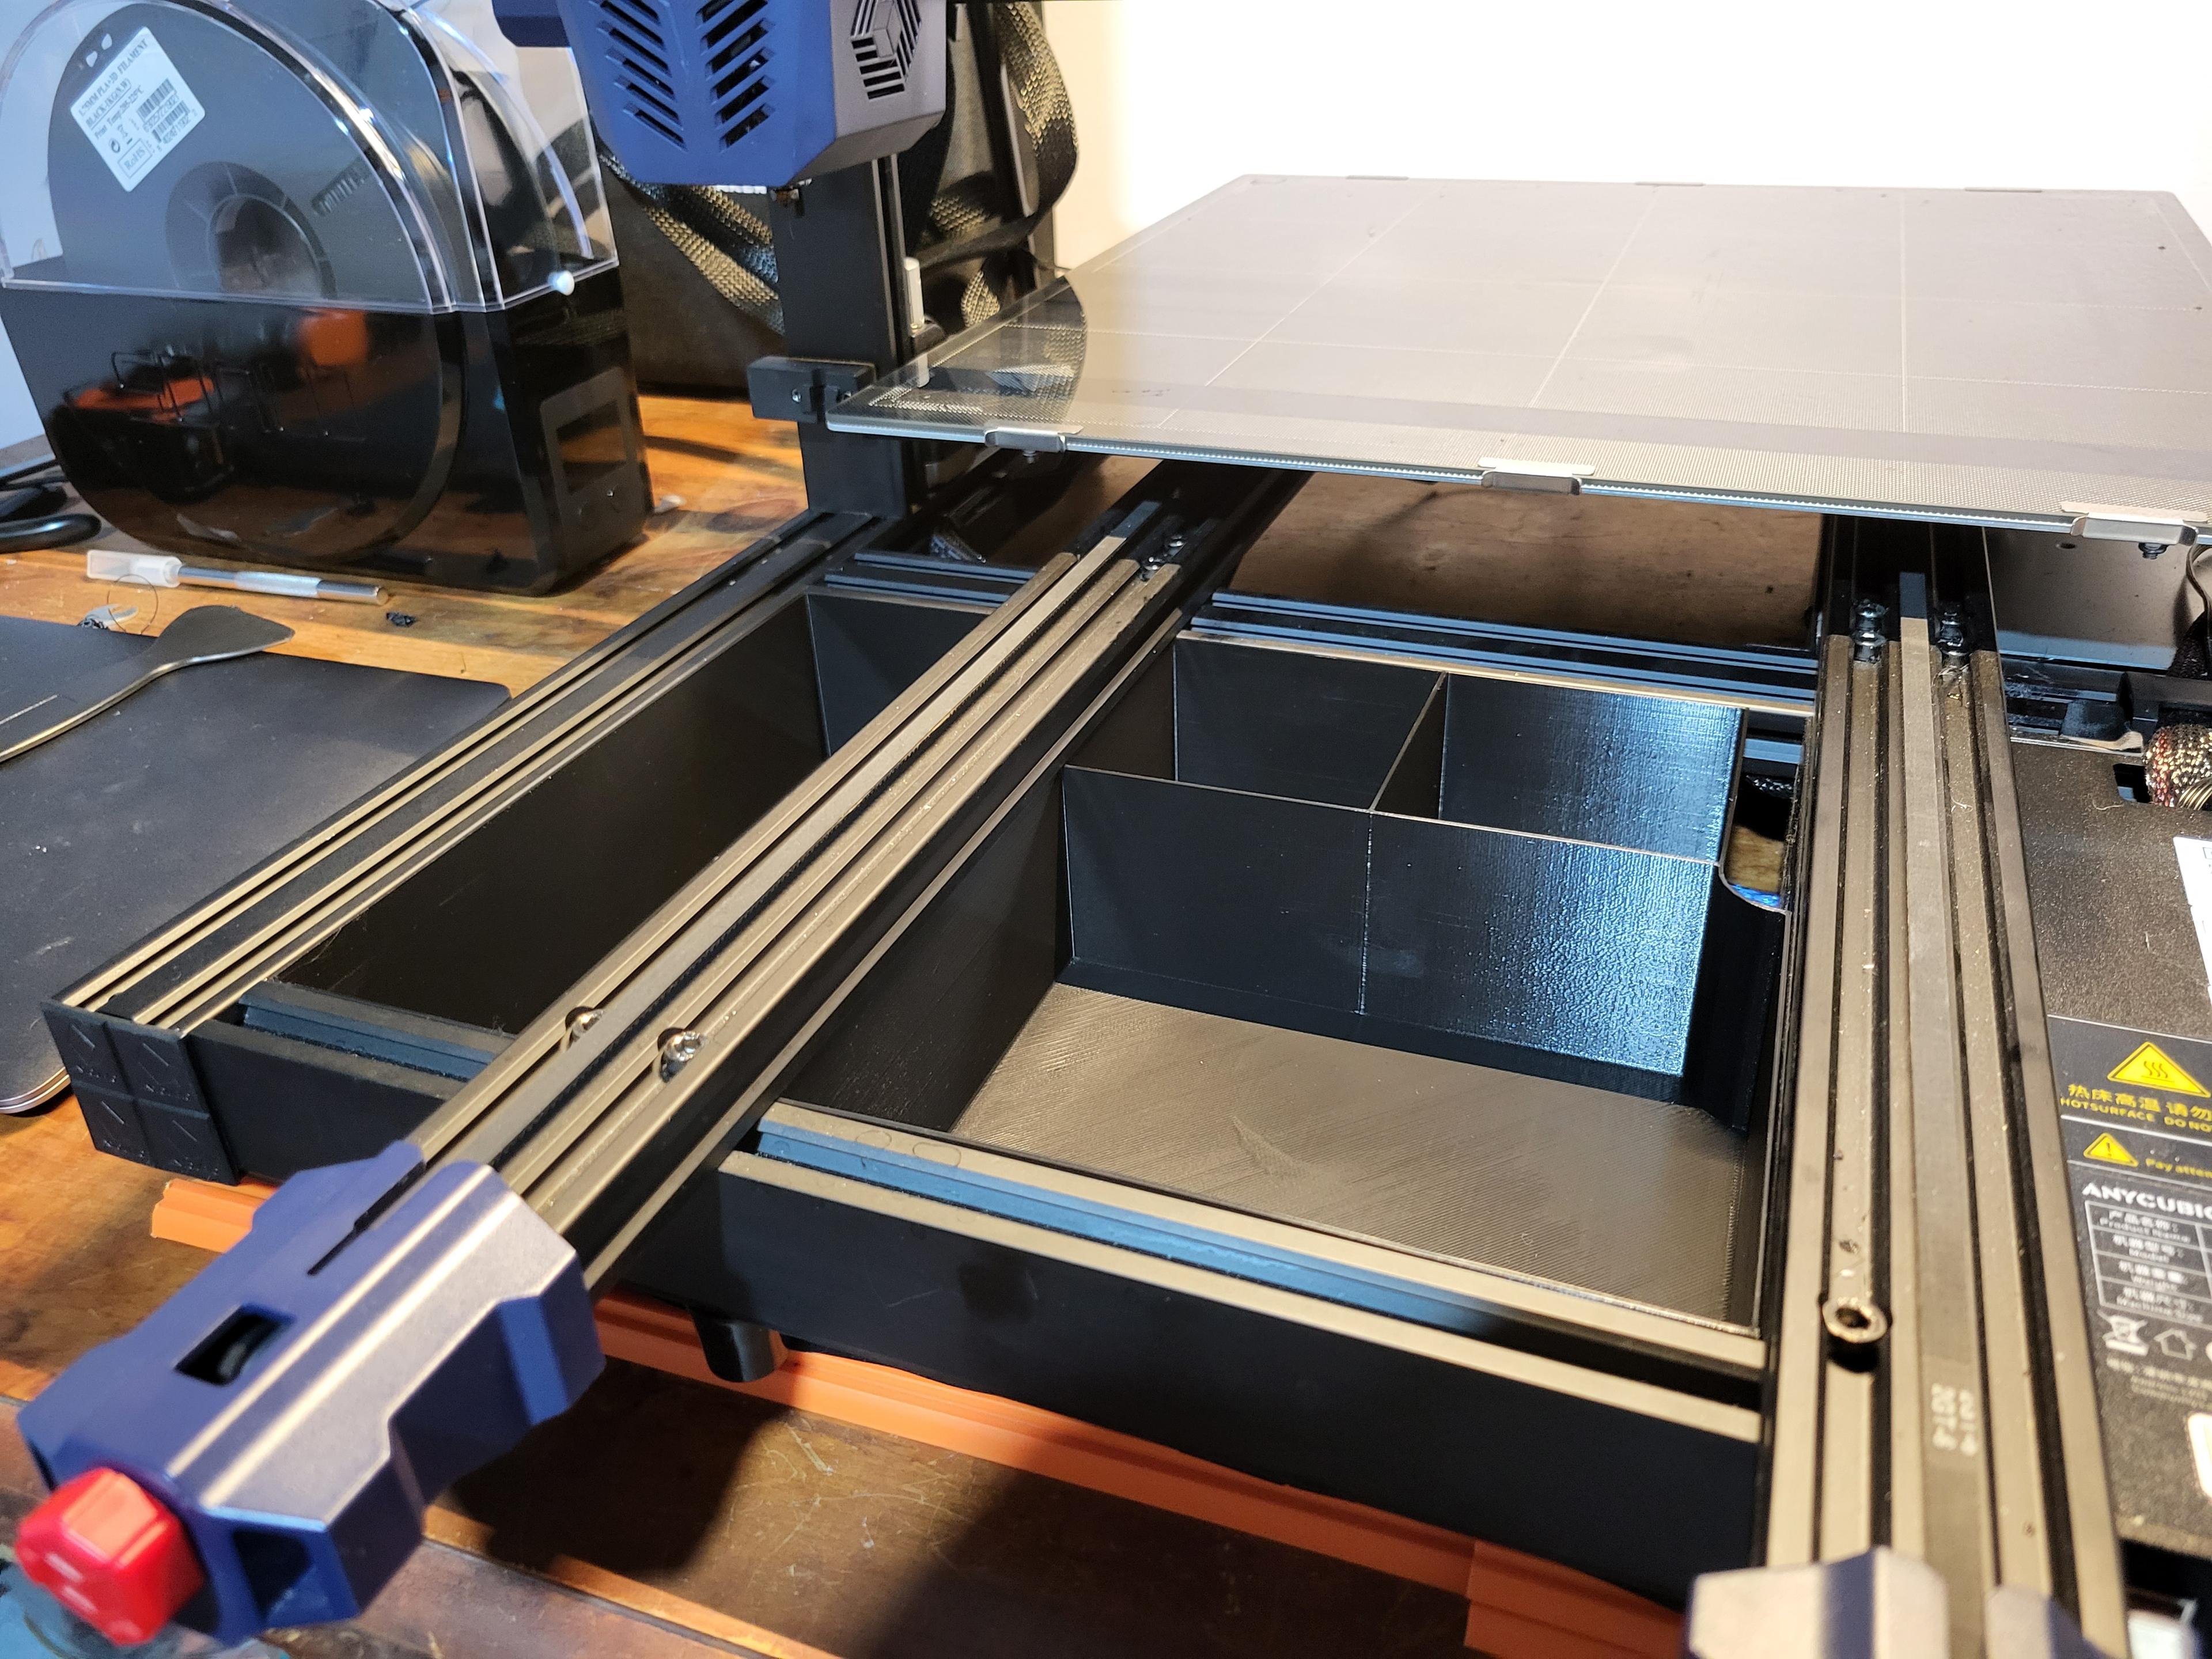 Anycubic Kobra Max storage  - This thing fit like a glove the design is absolutely awesome I couldn't believe it once I put it in place  - 3d model